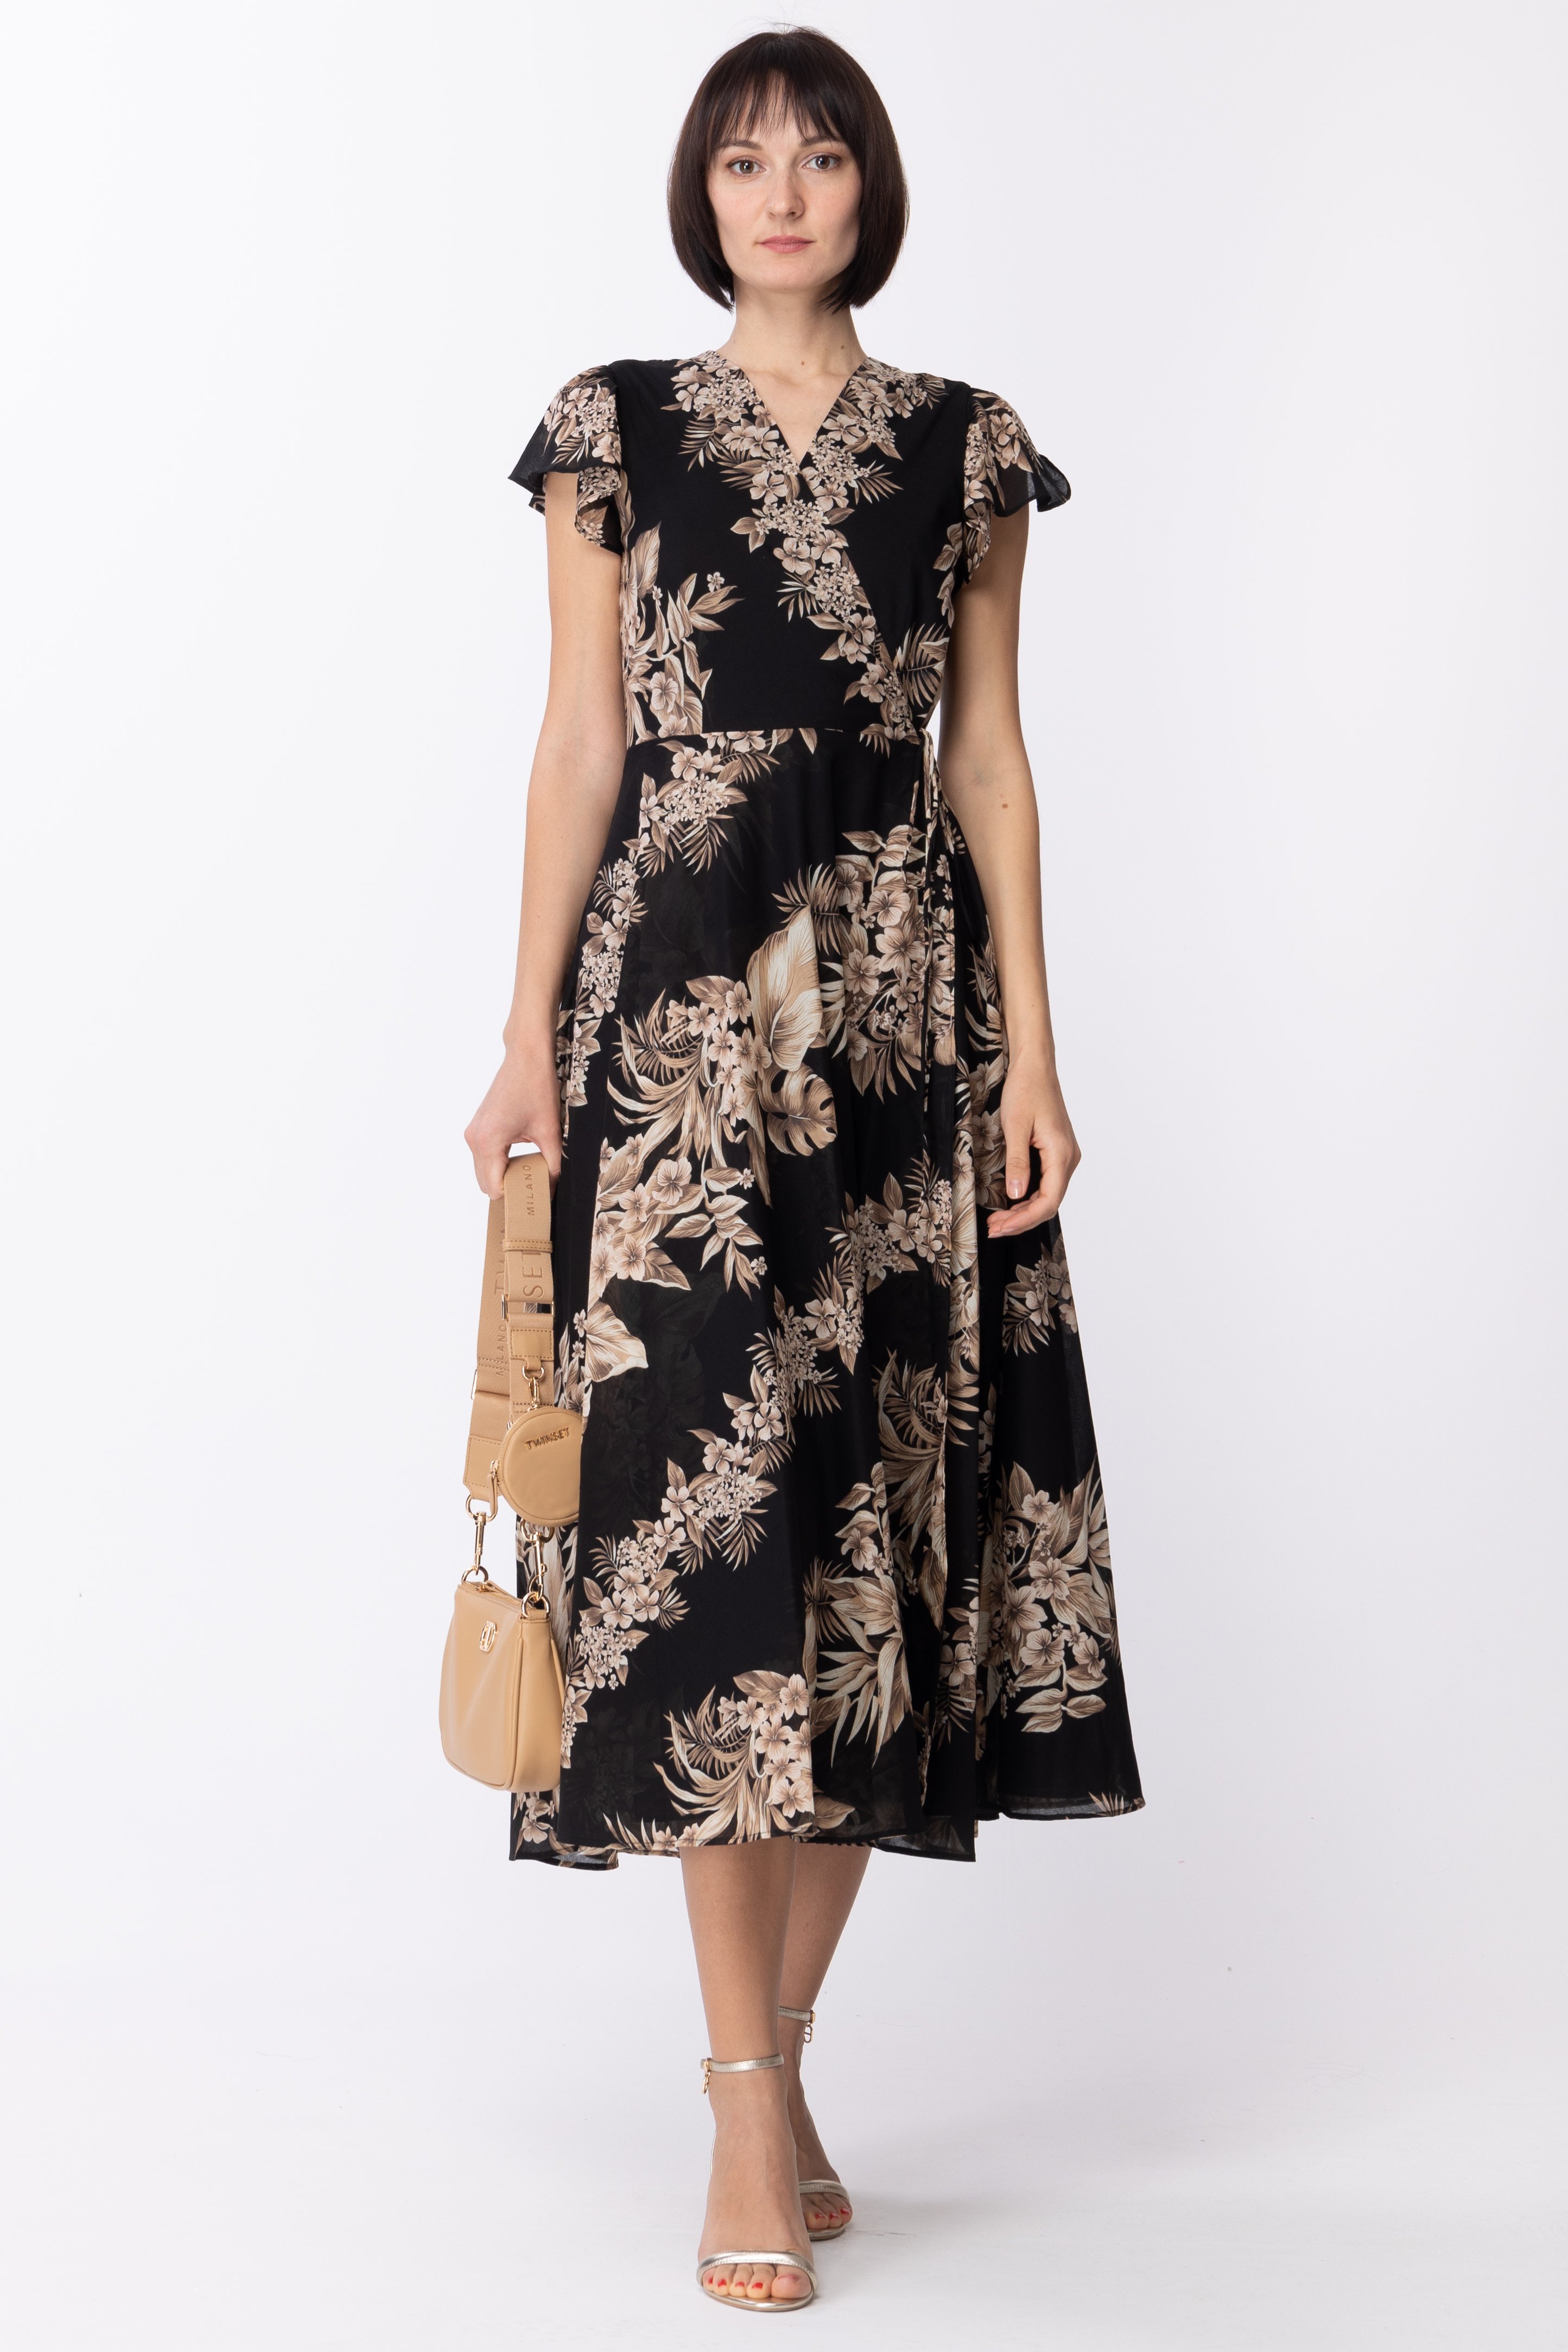 Preview: Twin-Set Dress with hibiscus print ST DISEGNO IBISCO NERO/CANAPA